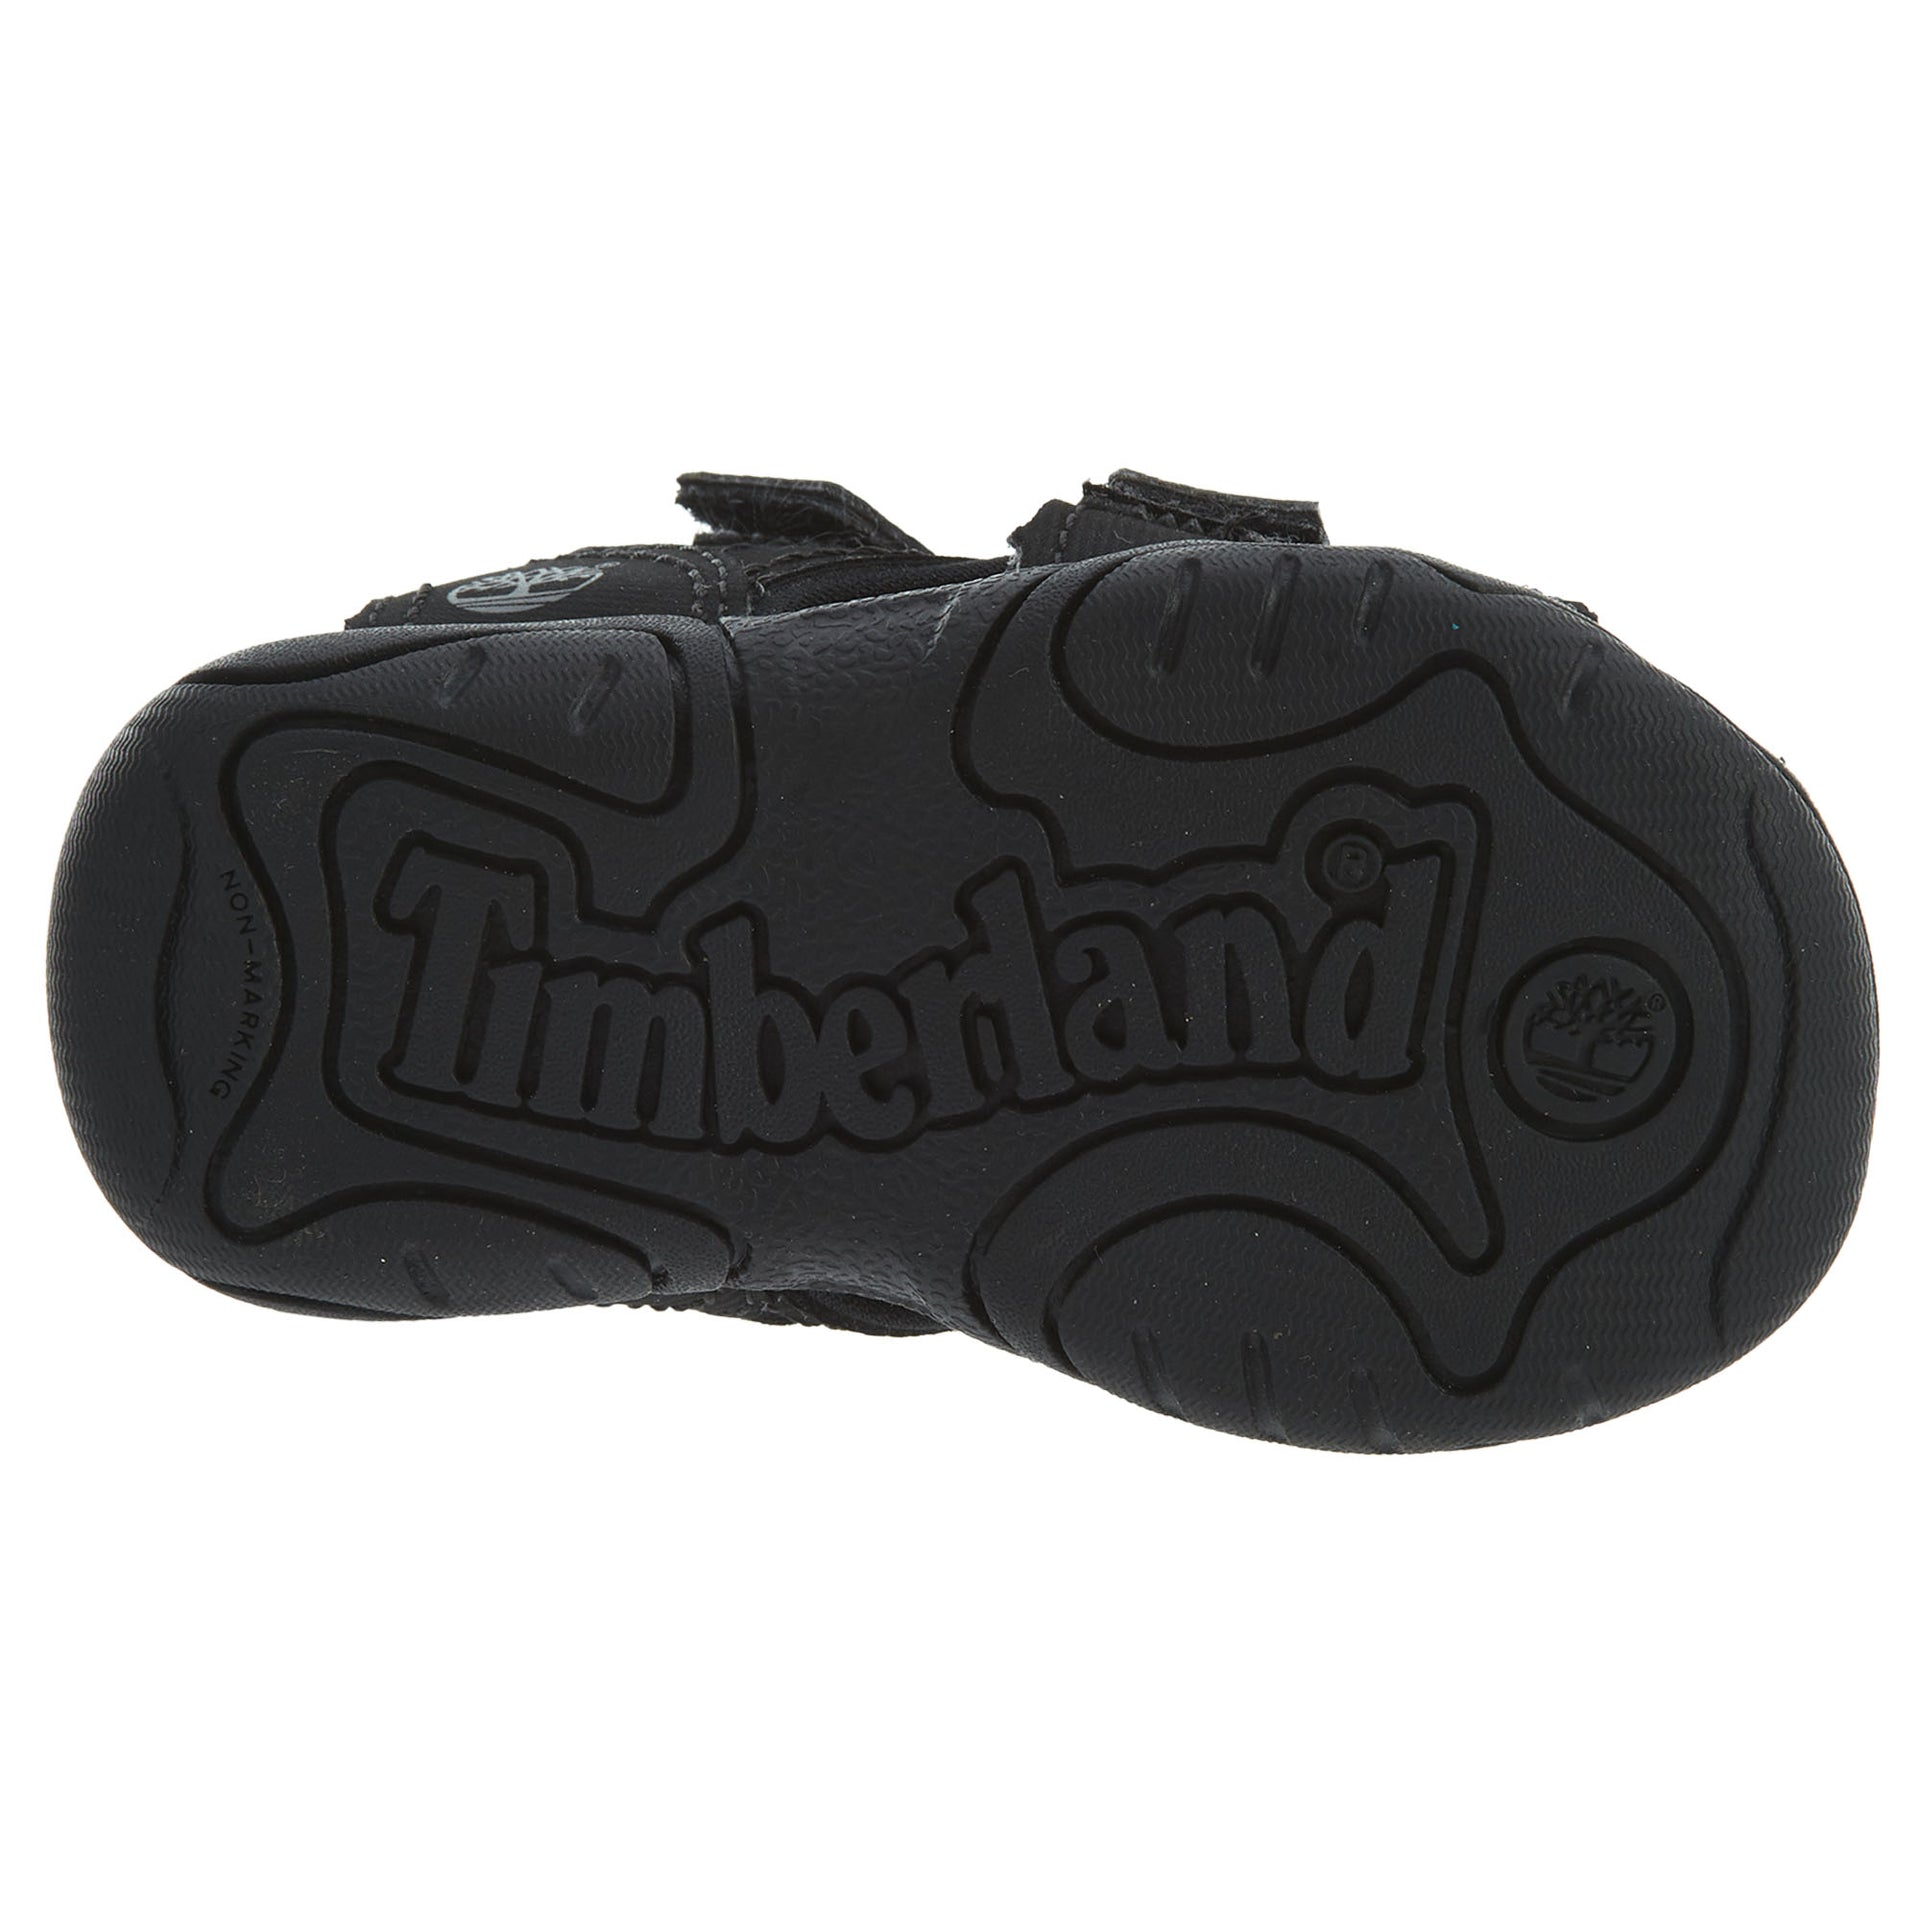 Timberland Adventure Seeker Closed Toe Sandal Toddlers Style : Tb03482a